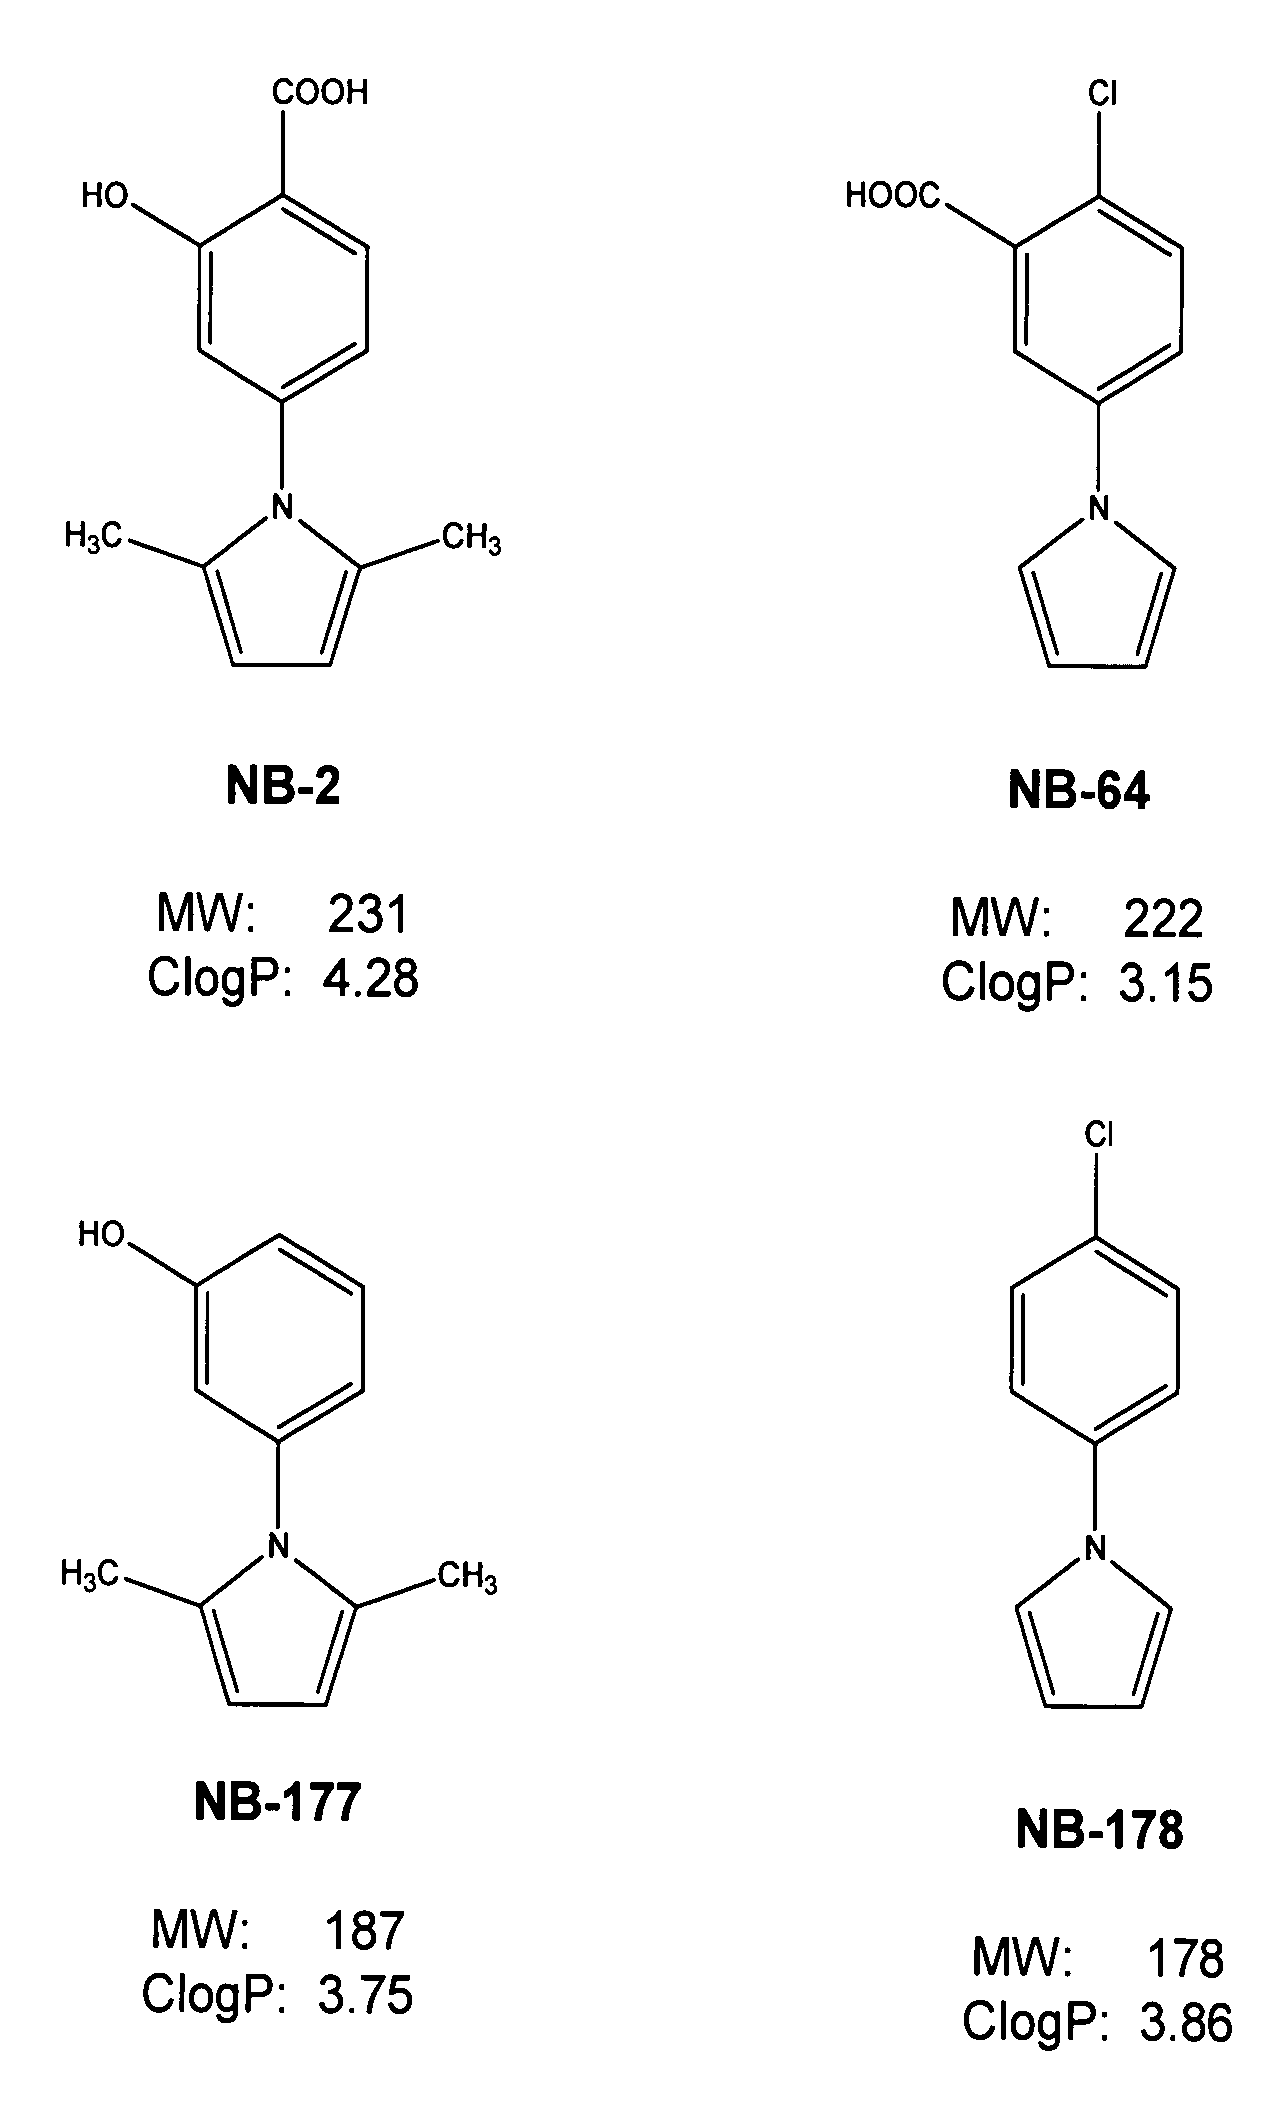 Compounds for inhibition of HIV infection by blocking HIV entry